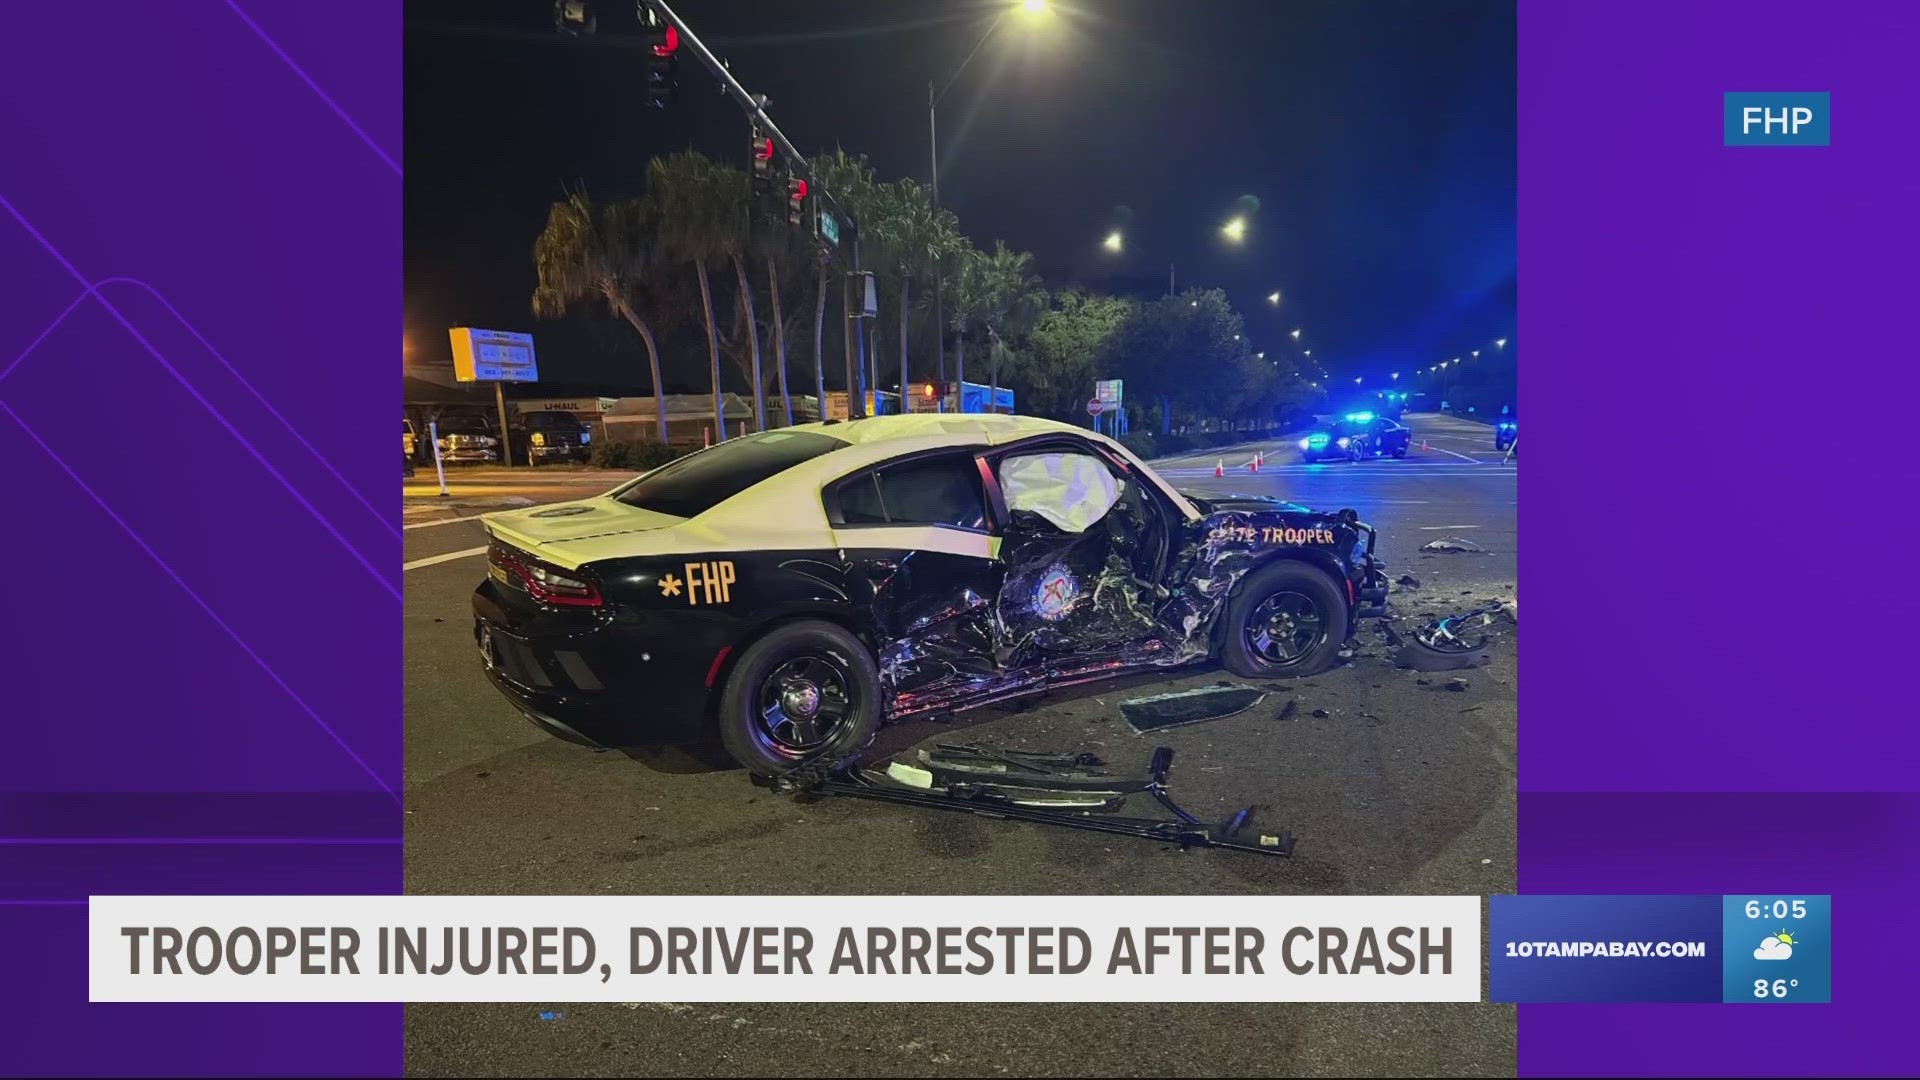 The 51-year-old trooper from Lakeland suffered minor injuries.